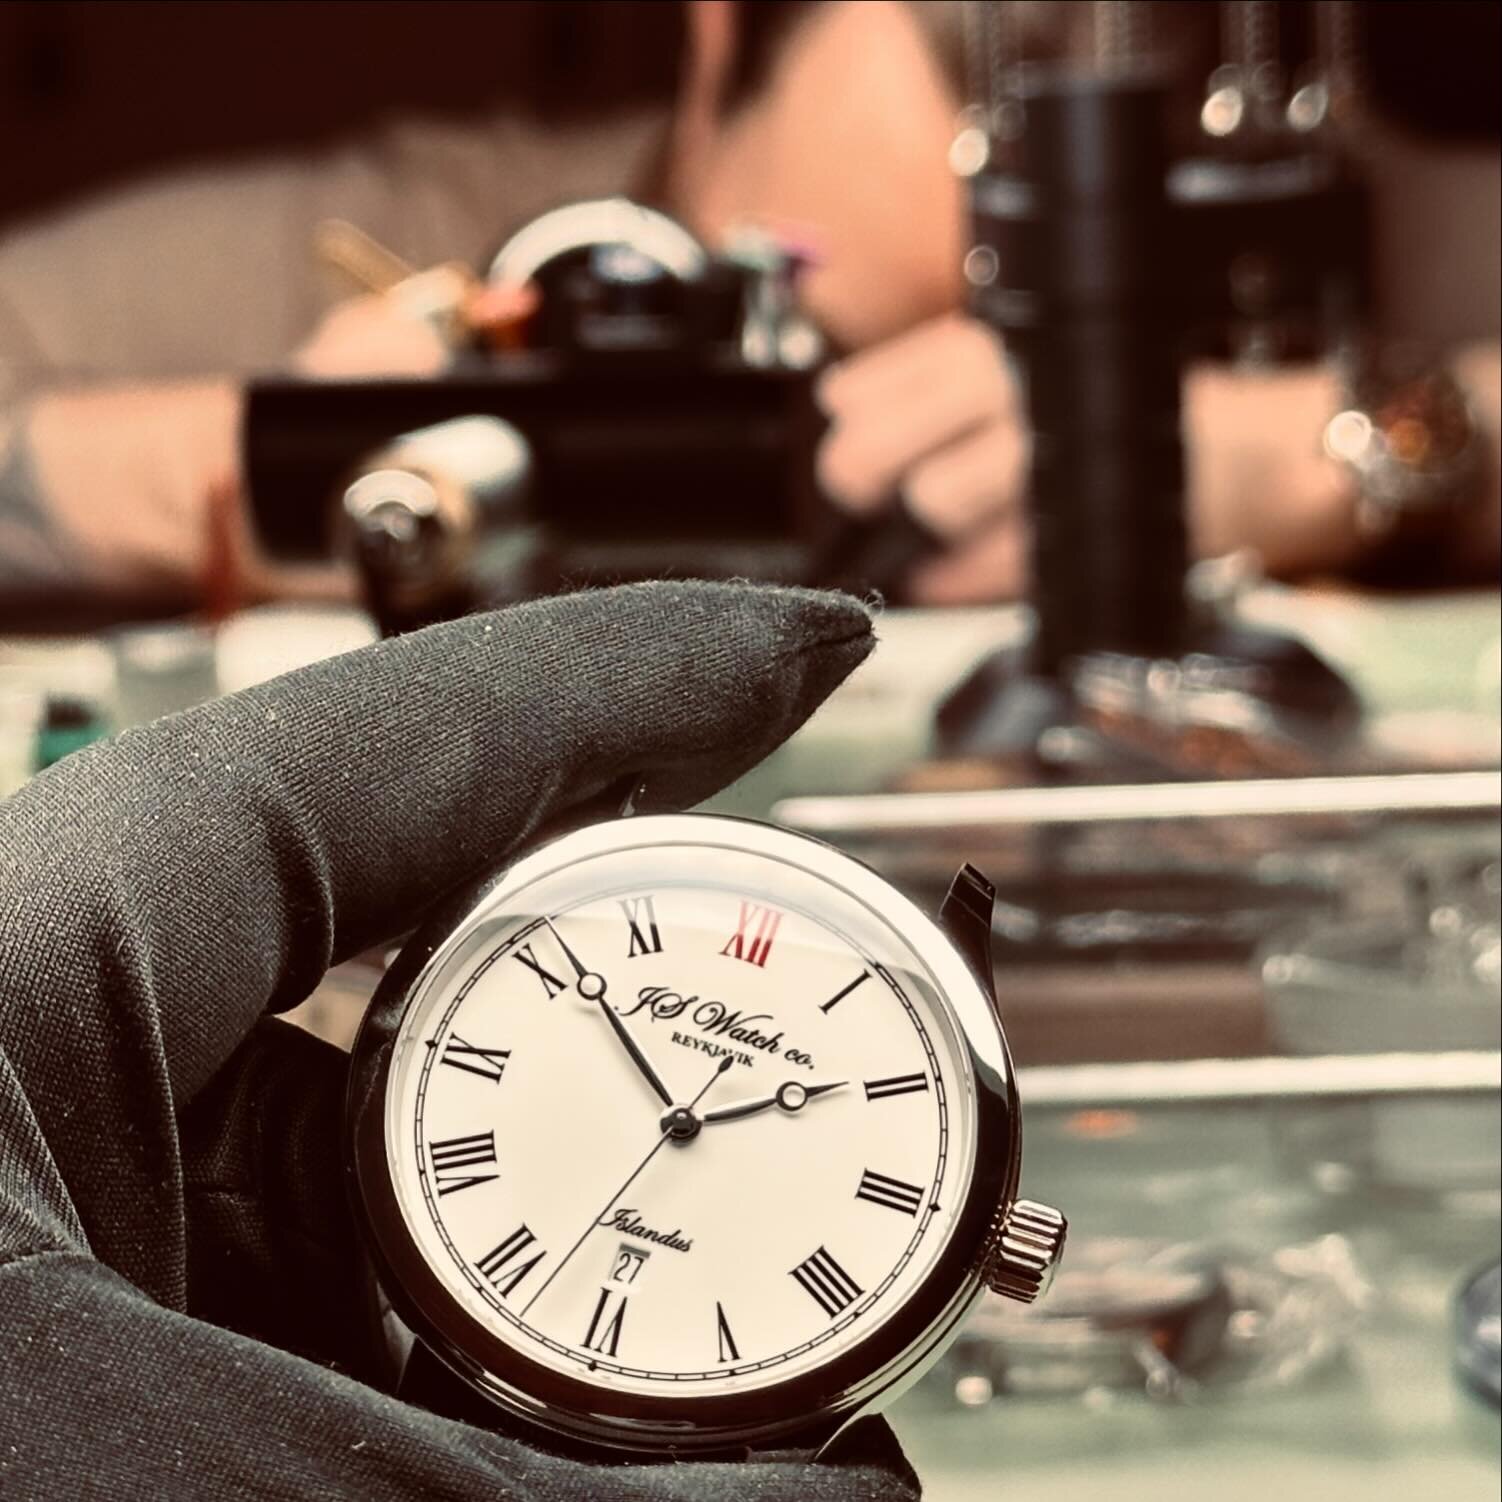 This freshly crafted Islandus piece, adorned with its signature red XII, is more than a watch&mdash;it&rsquo;s a testament to timeless elegance and meticulous craftsmanship. As Gilbert II focuses in the background, each assembly becomes a piece of ar